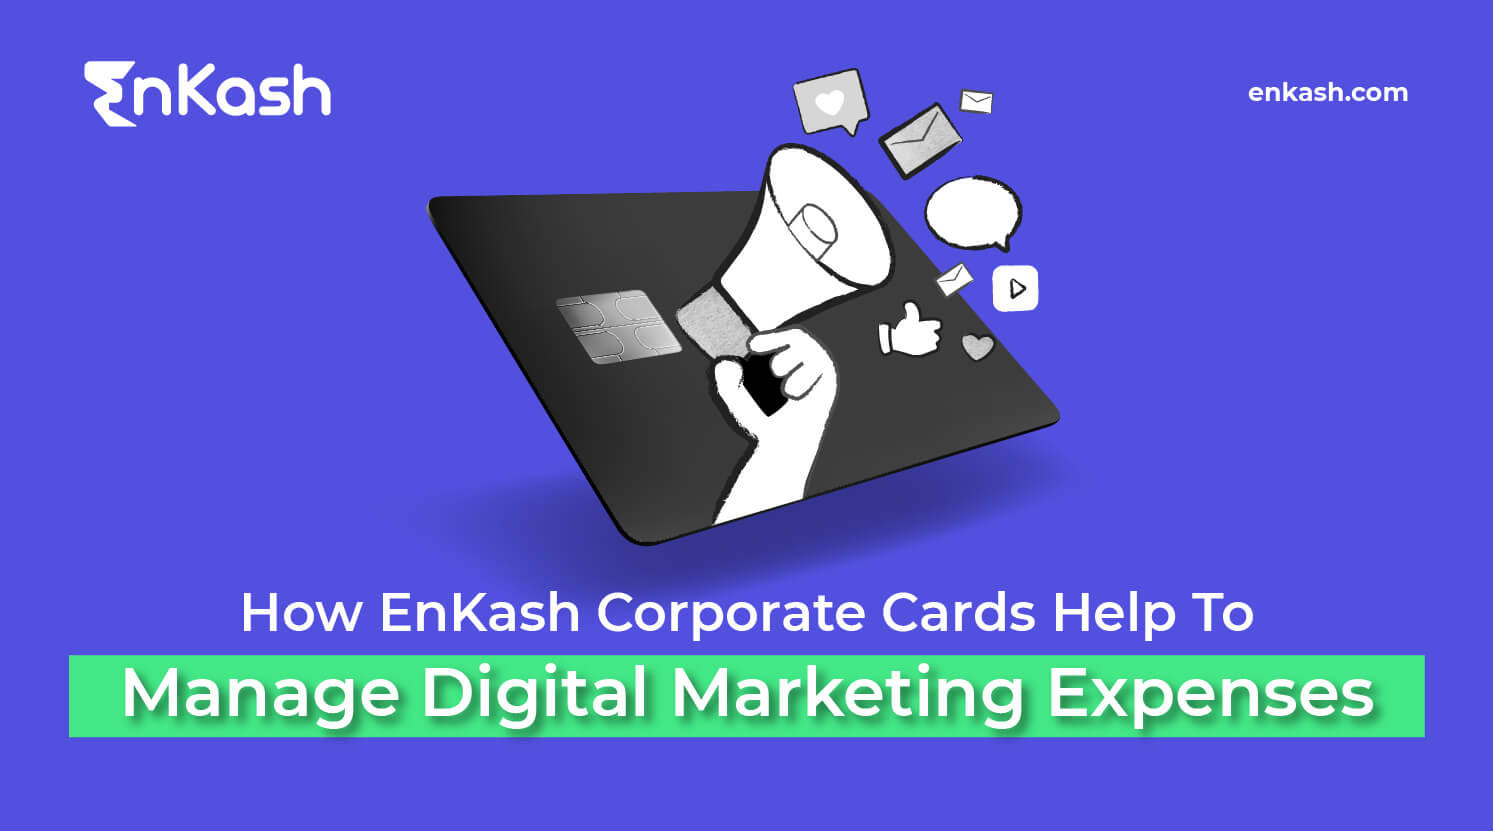 Manage Digital Marketing Expenses with Corporate Cards